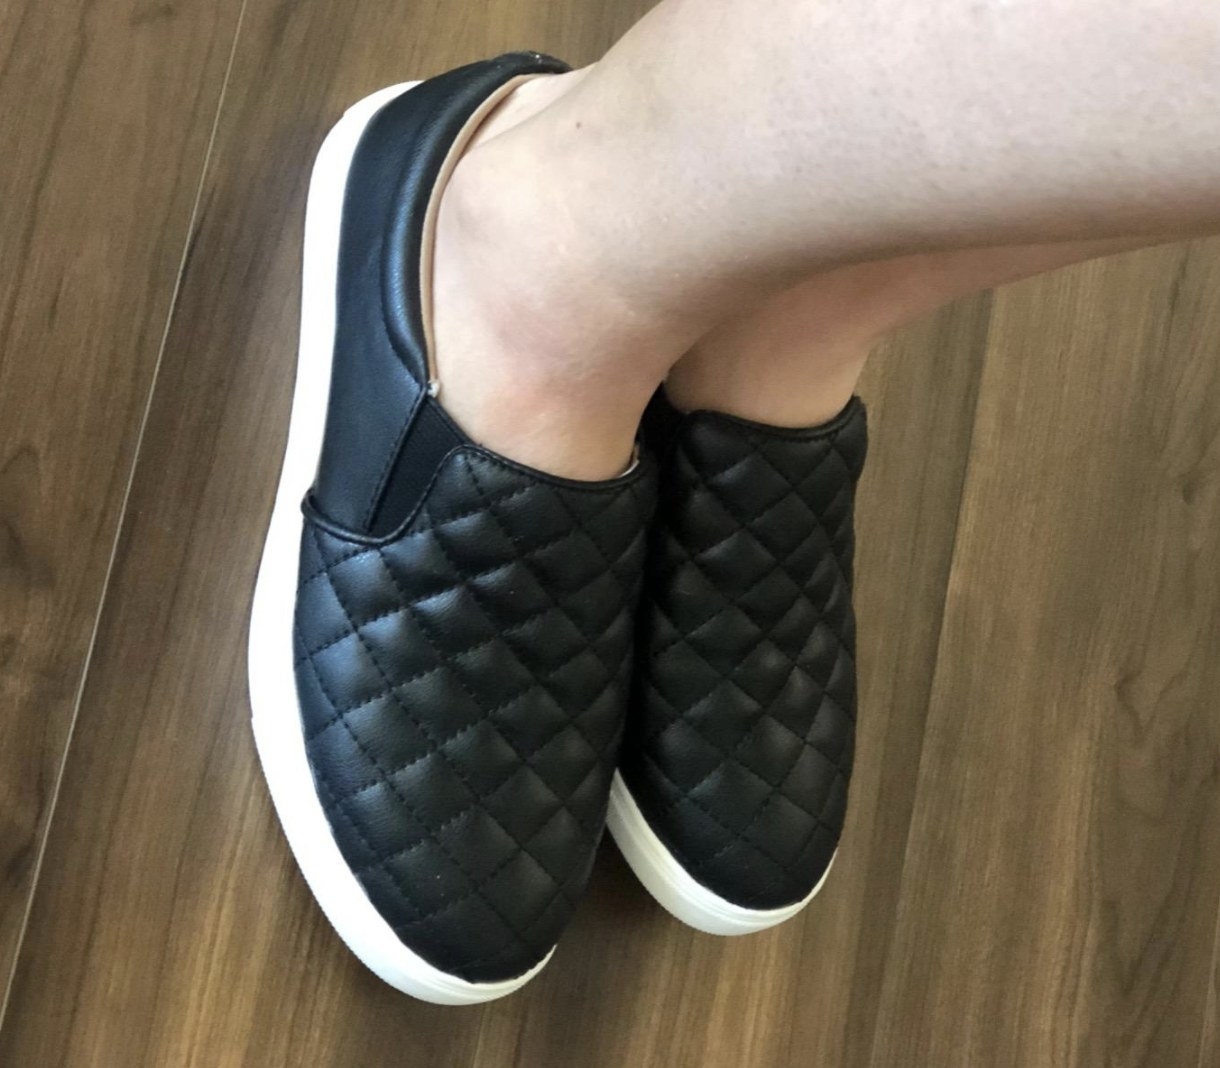 reviewer wearing the shoes in black